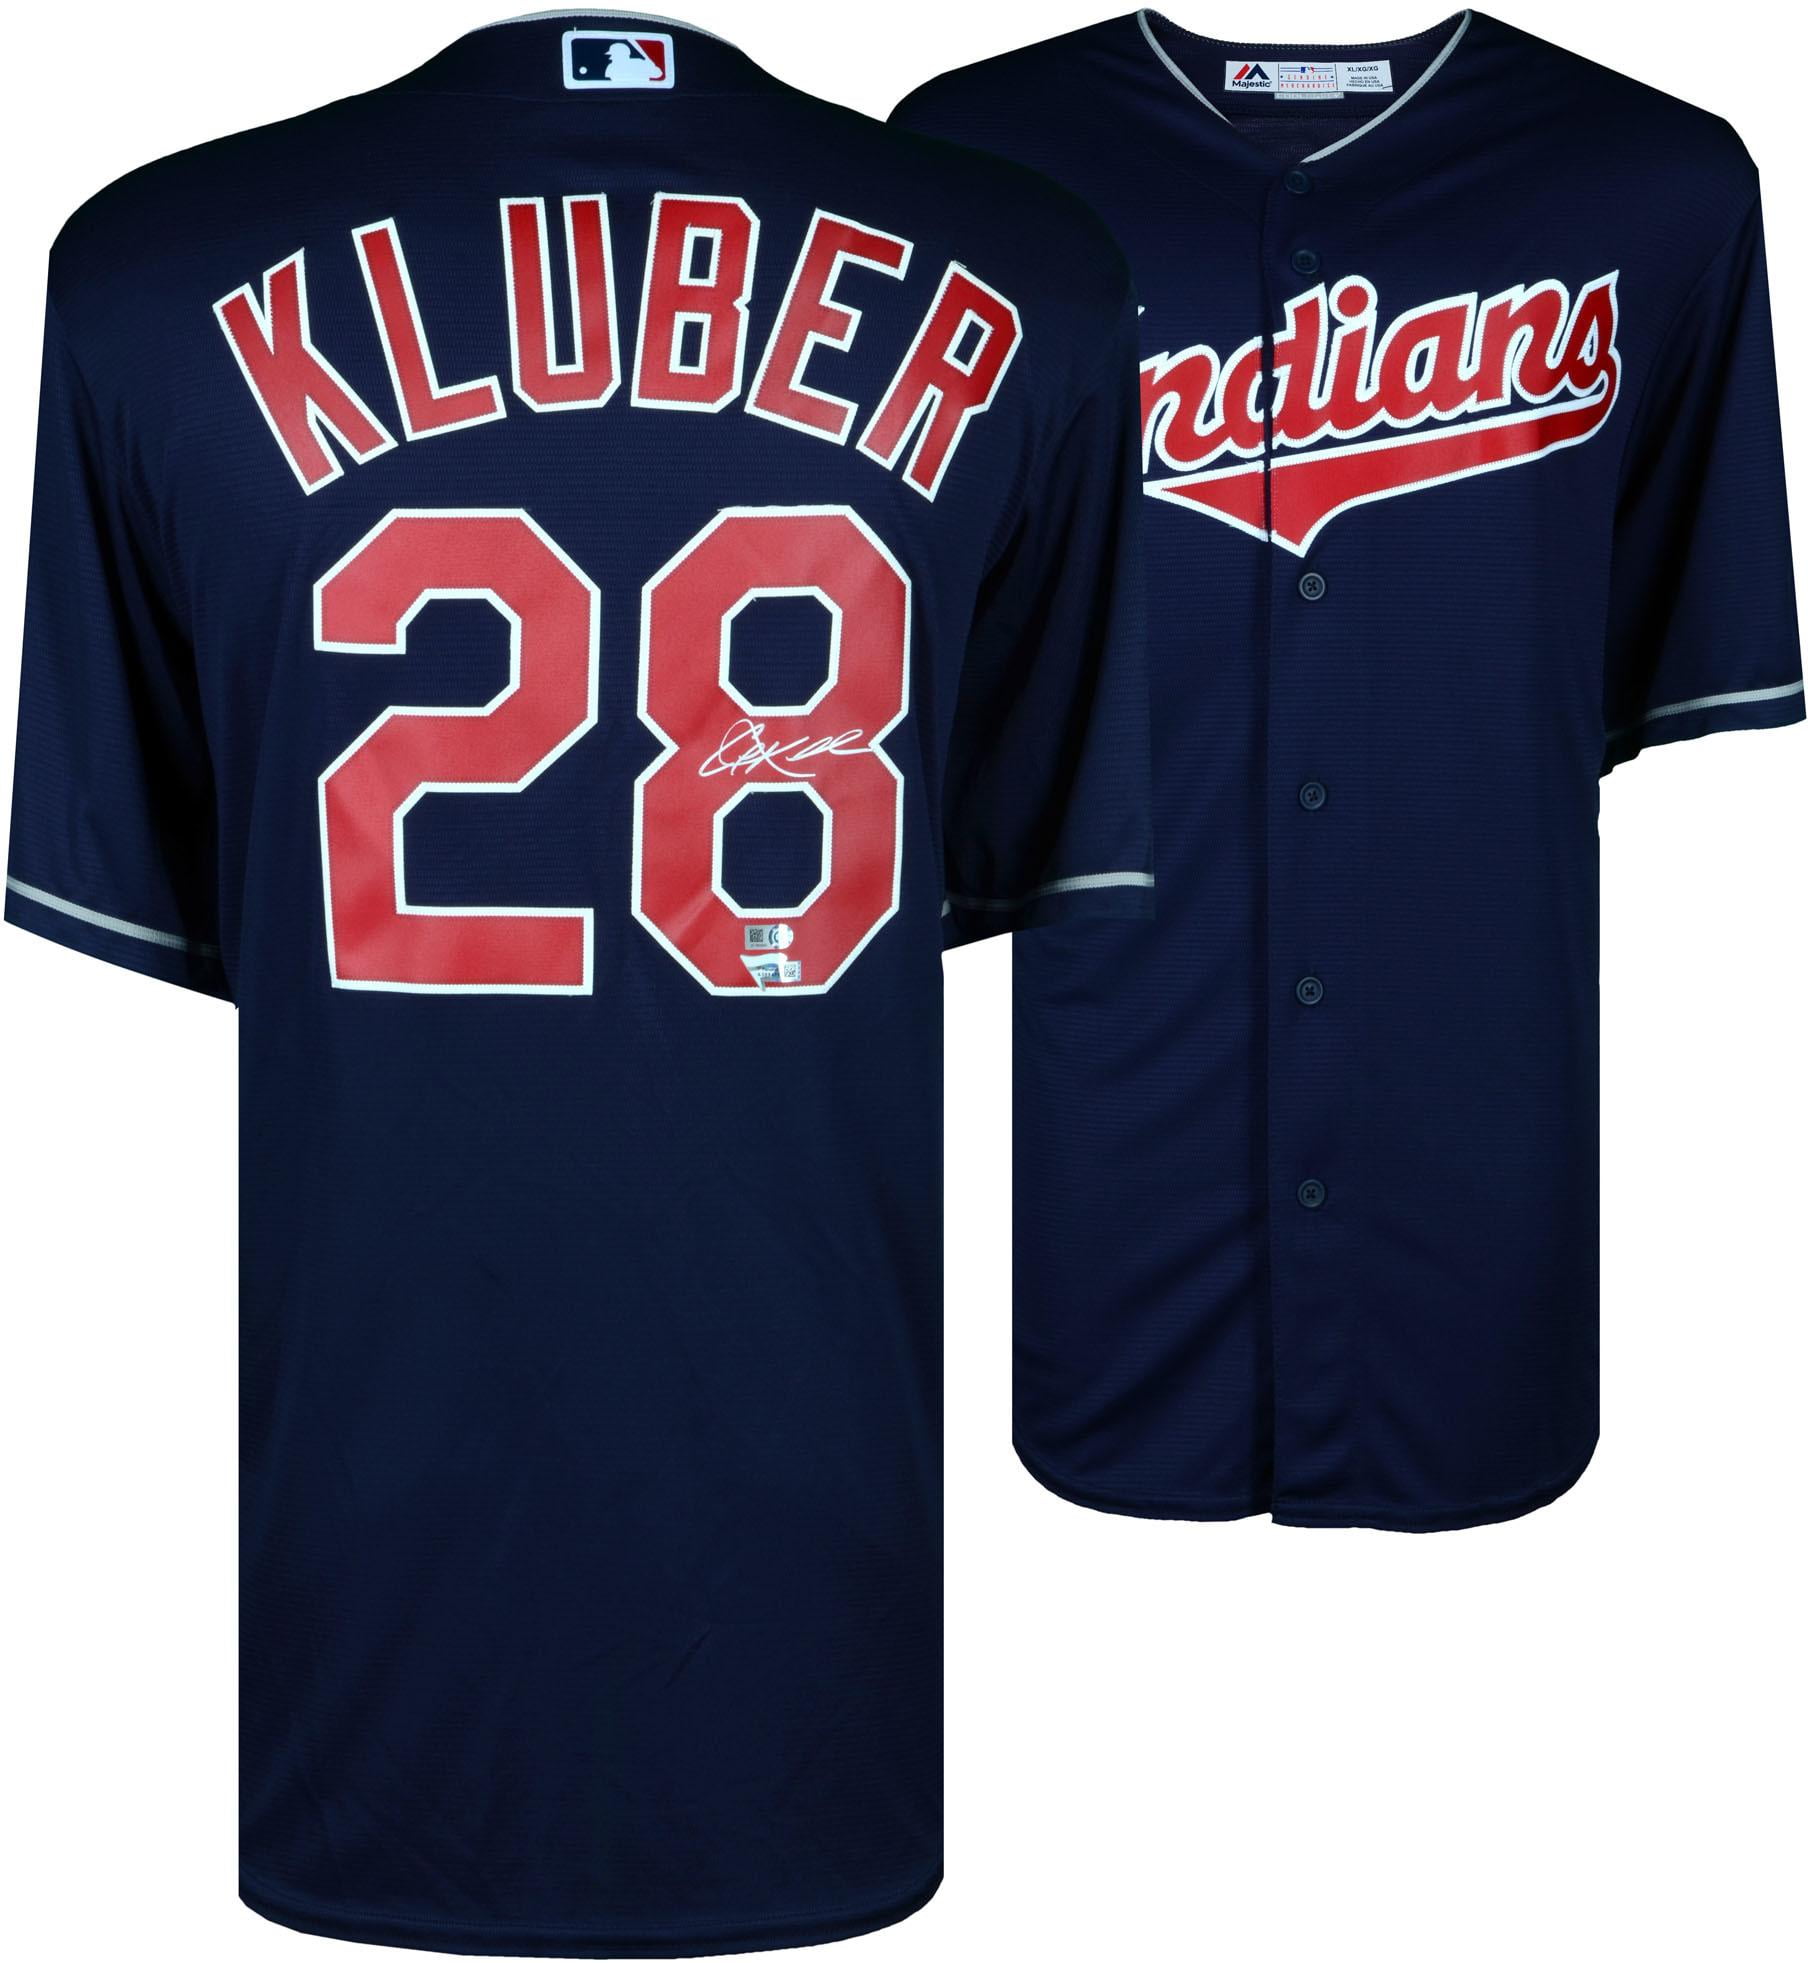 kluber indians jersey